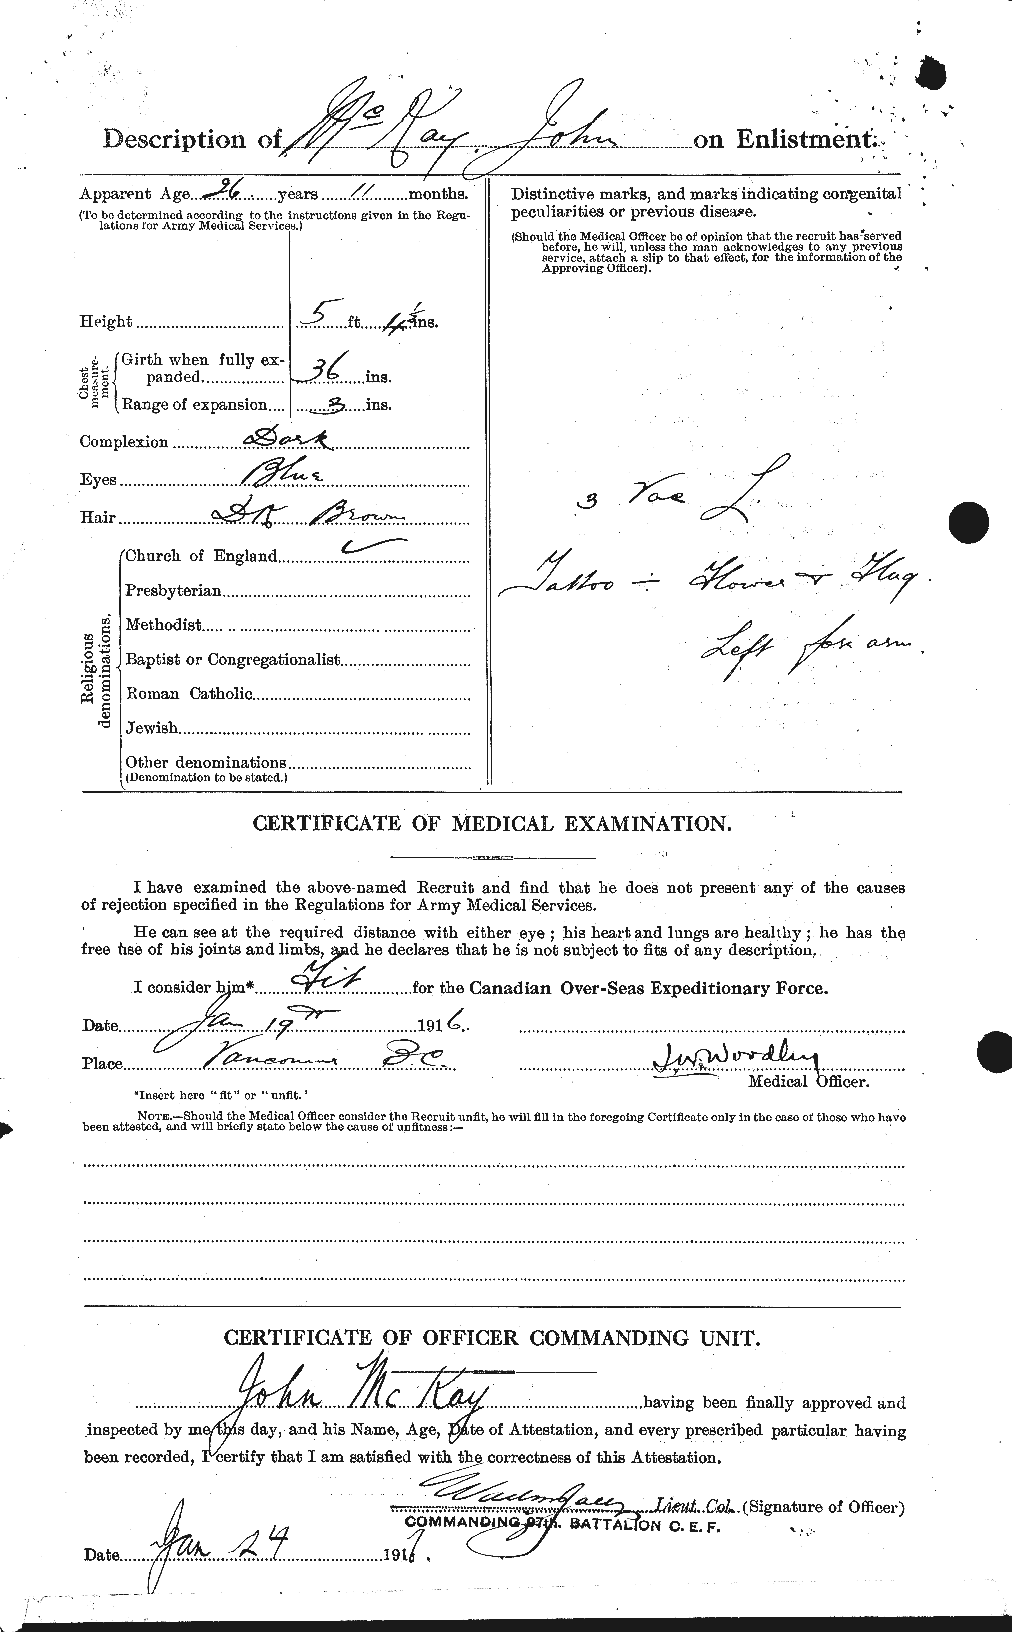 Personnel Records of the First World War - CEF 526954b